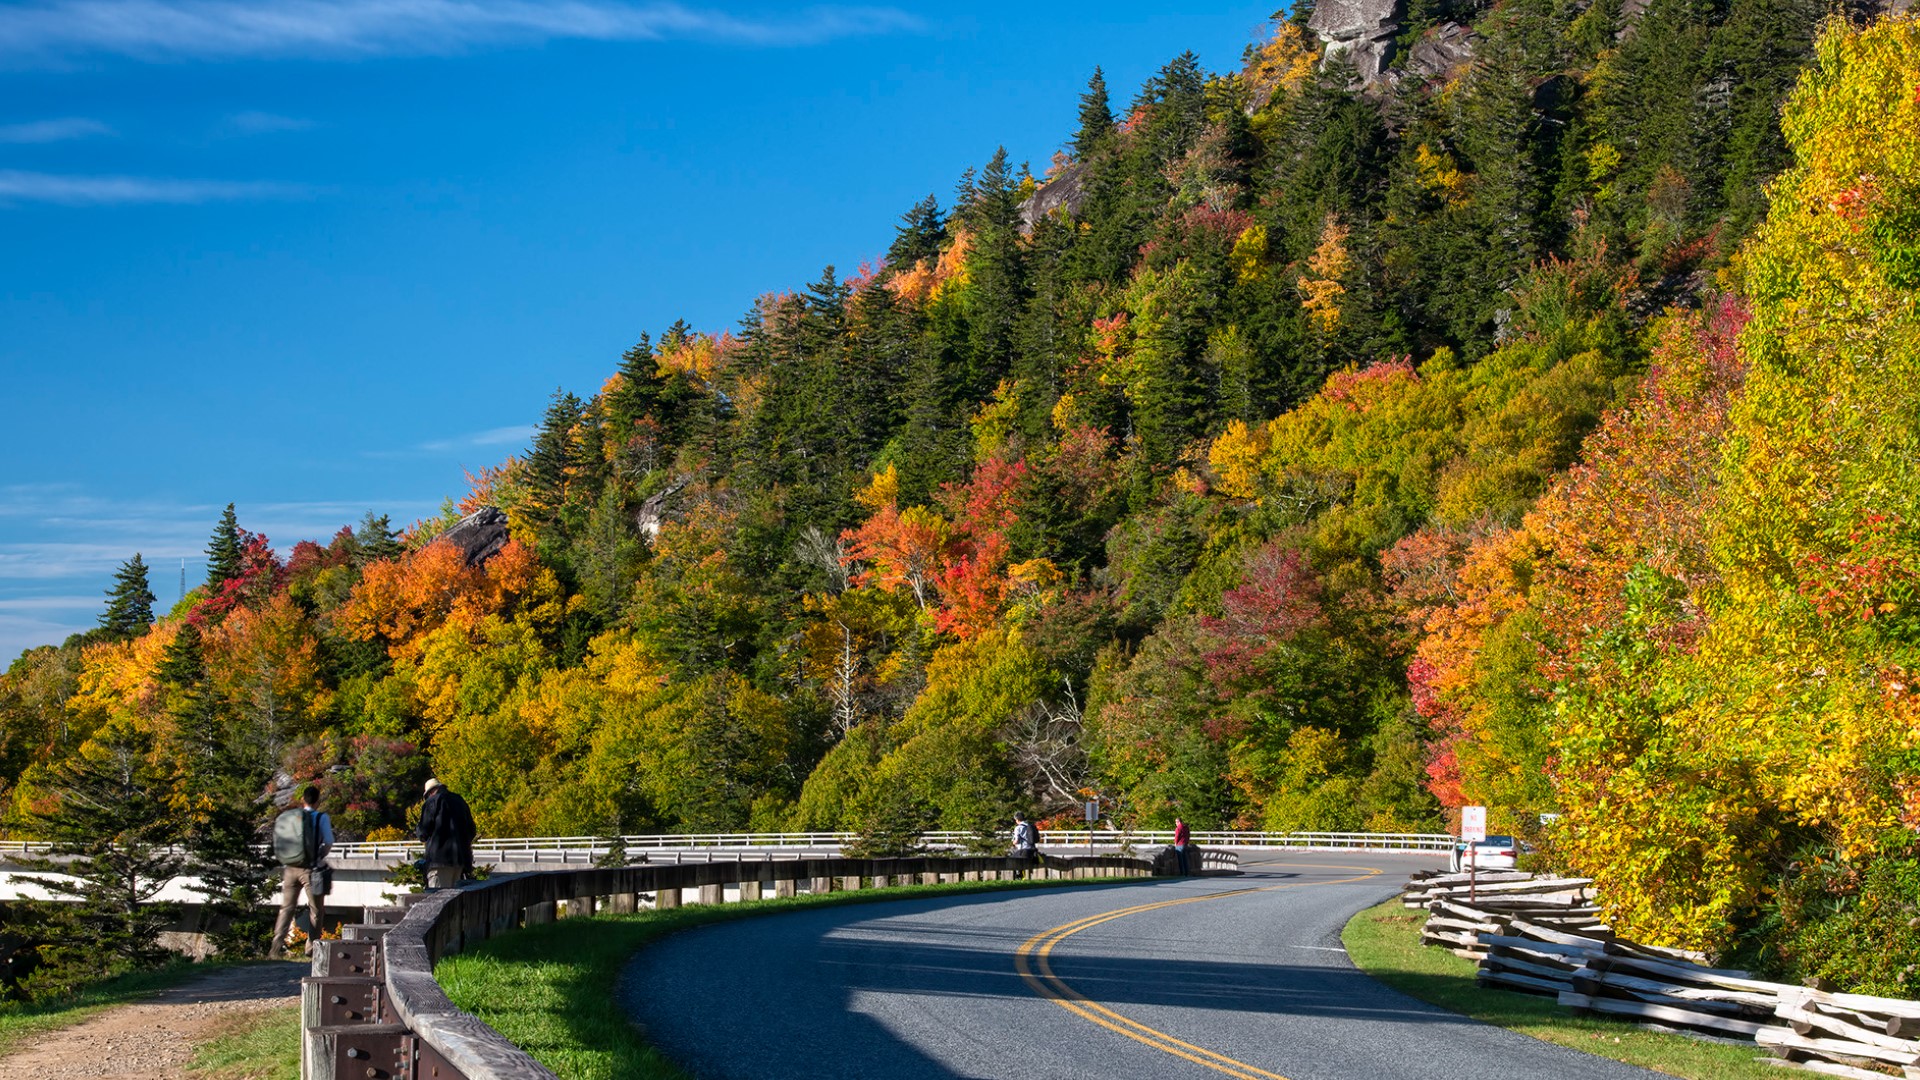 The Blue Ridge Parkway was recently named the No. 3 national park in the US for 2022.